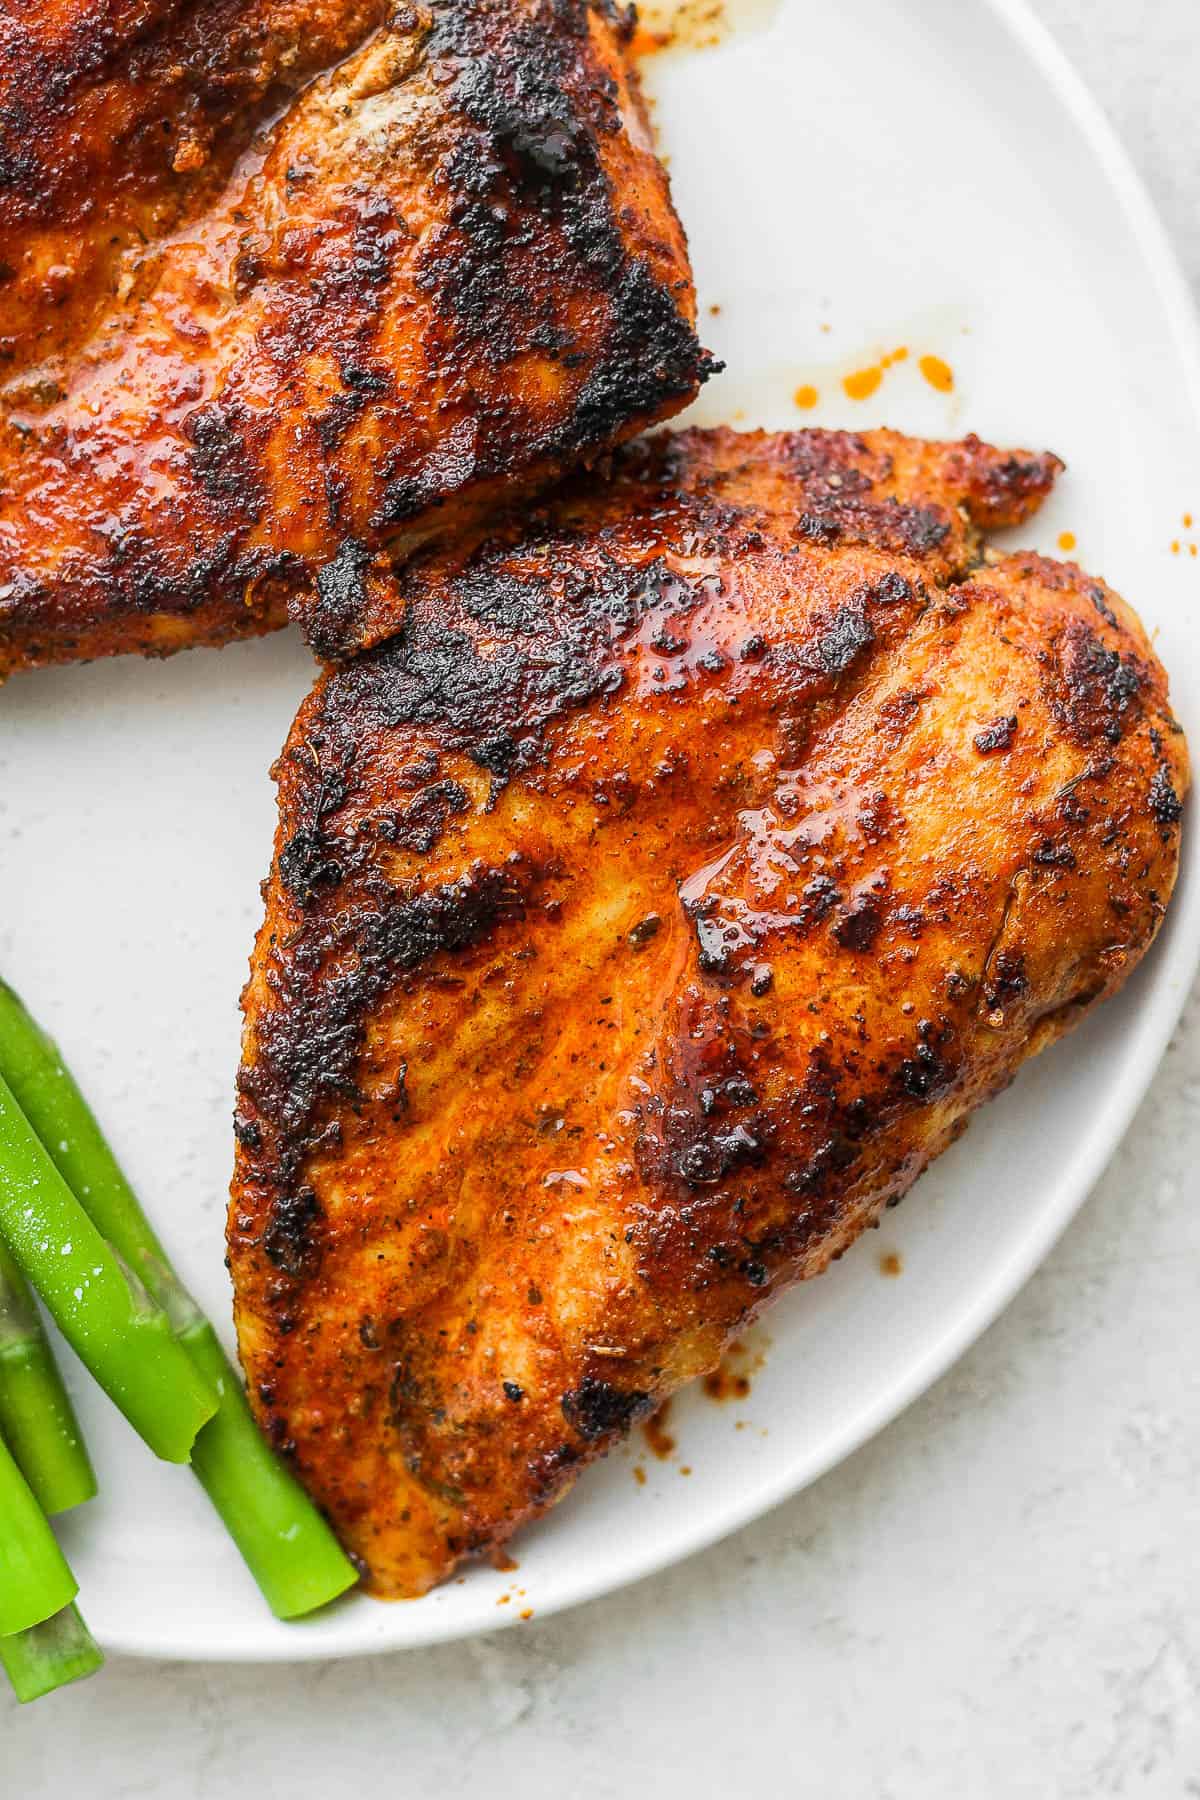 Blackened chicken breast on a plate.